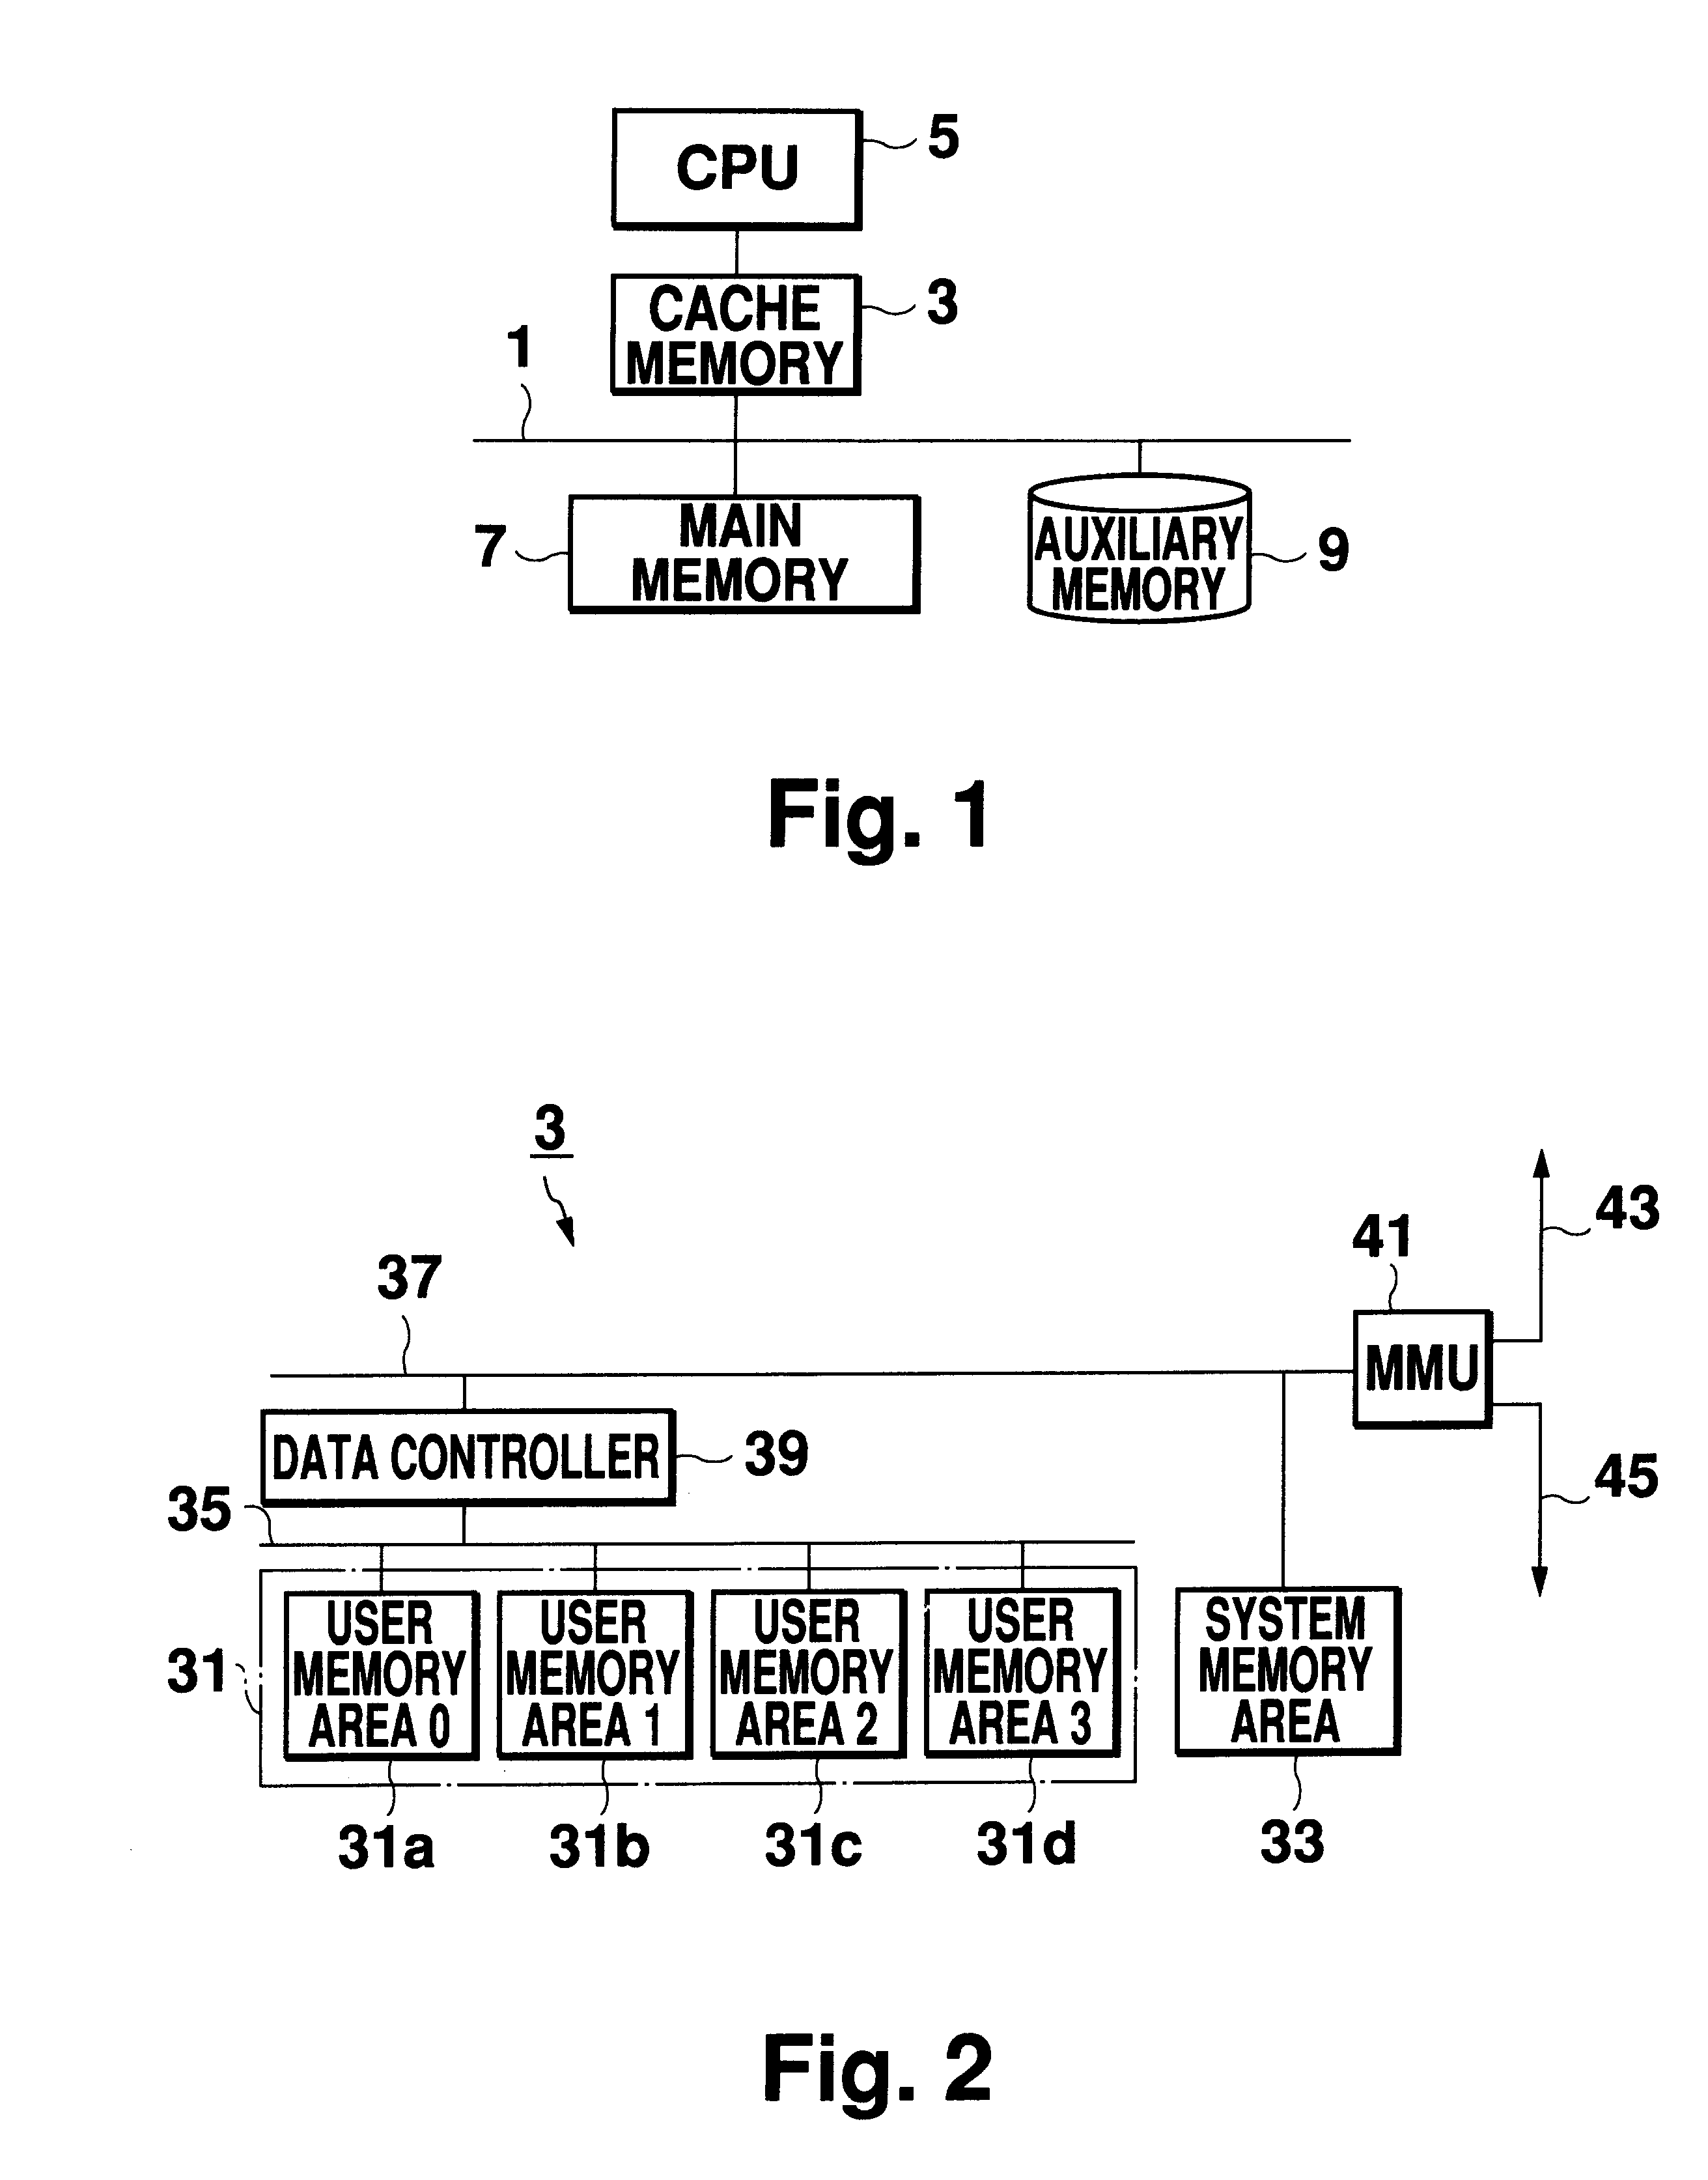 Cache memory system having at least one user area and one system area wherein the user area(s) and the system area(s) are operated in two different replacement procedures